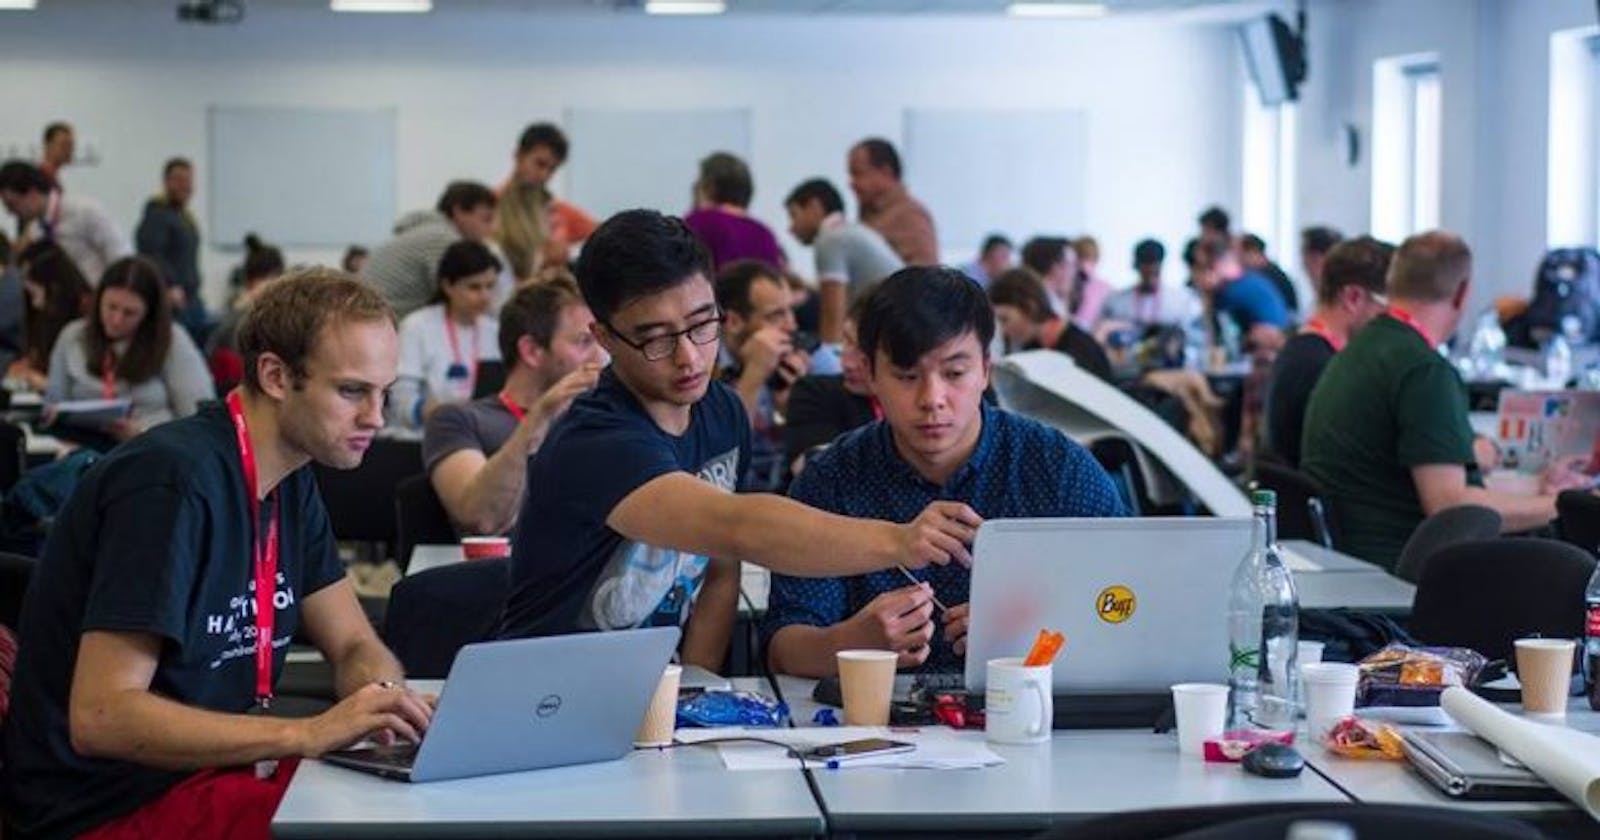 How to find your awesome team at a Hackathon